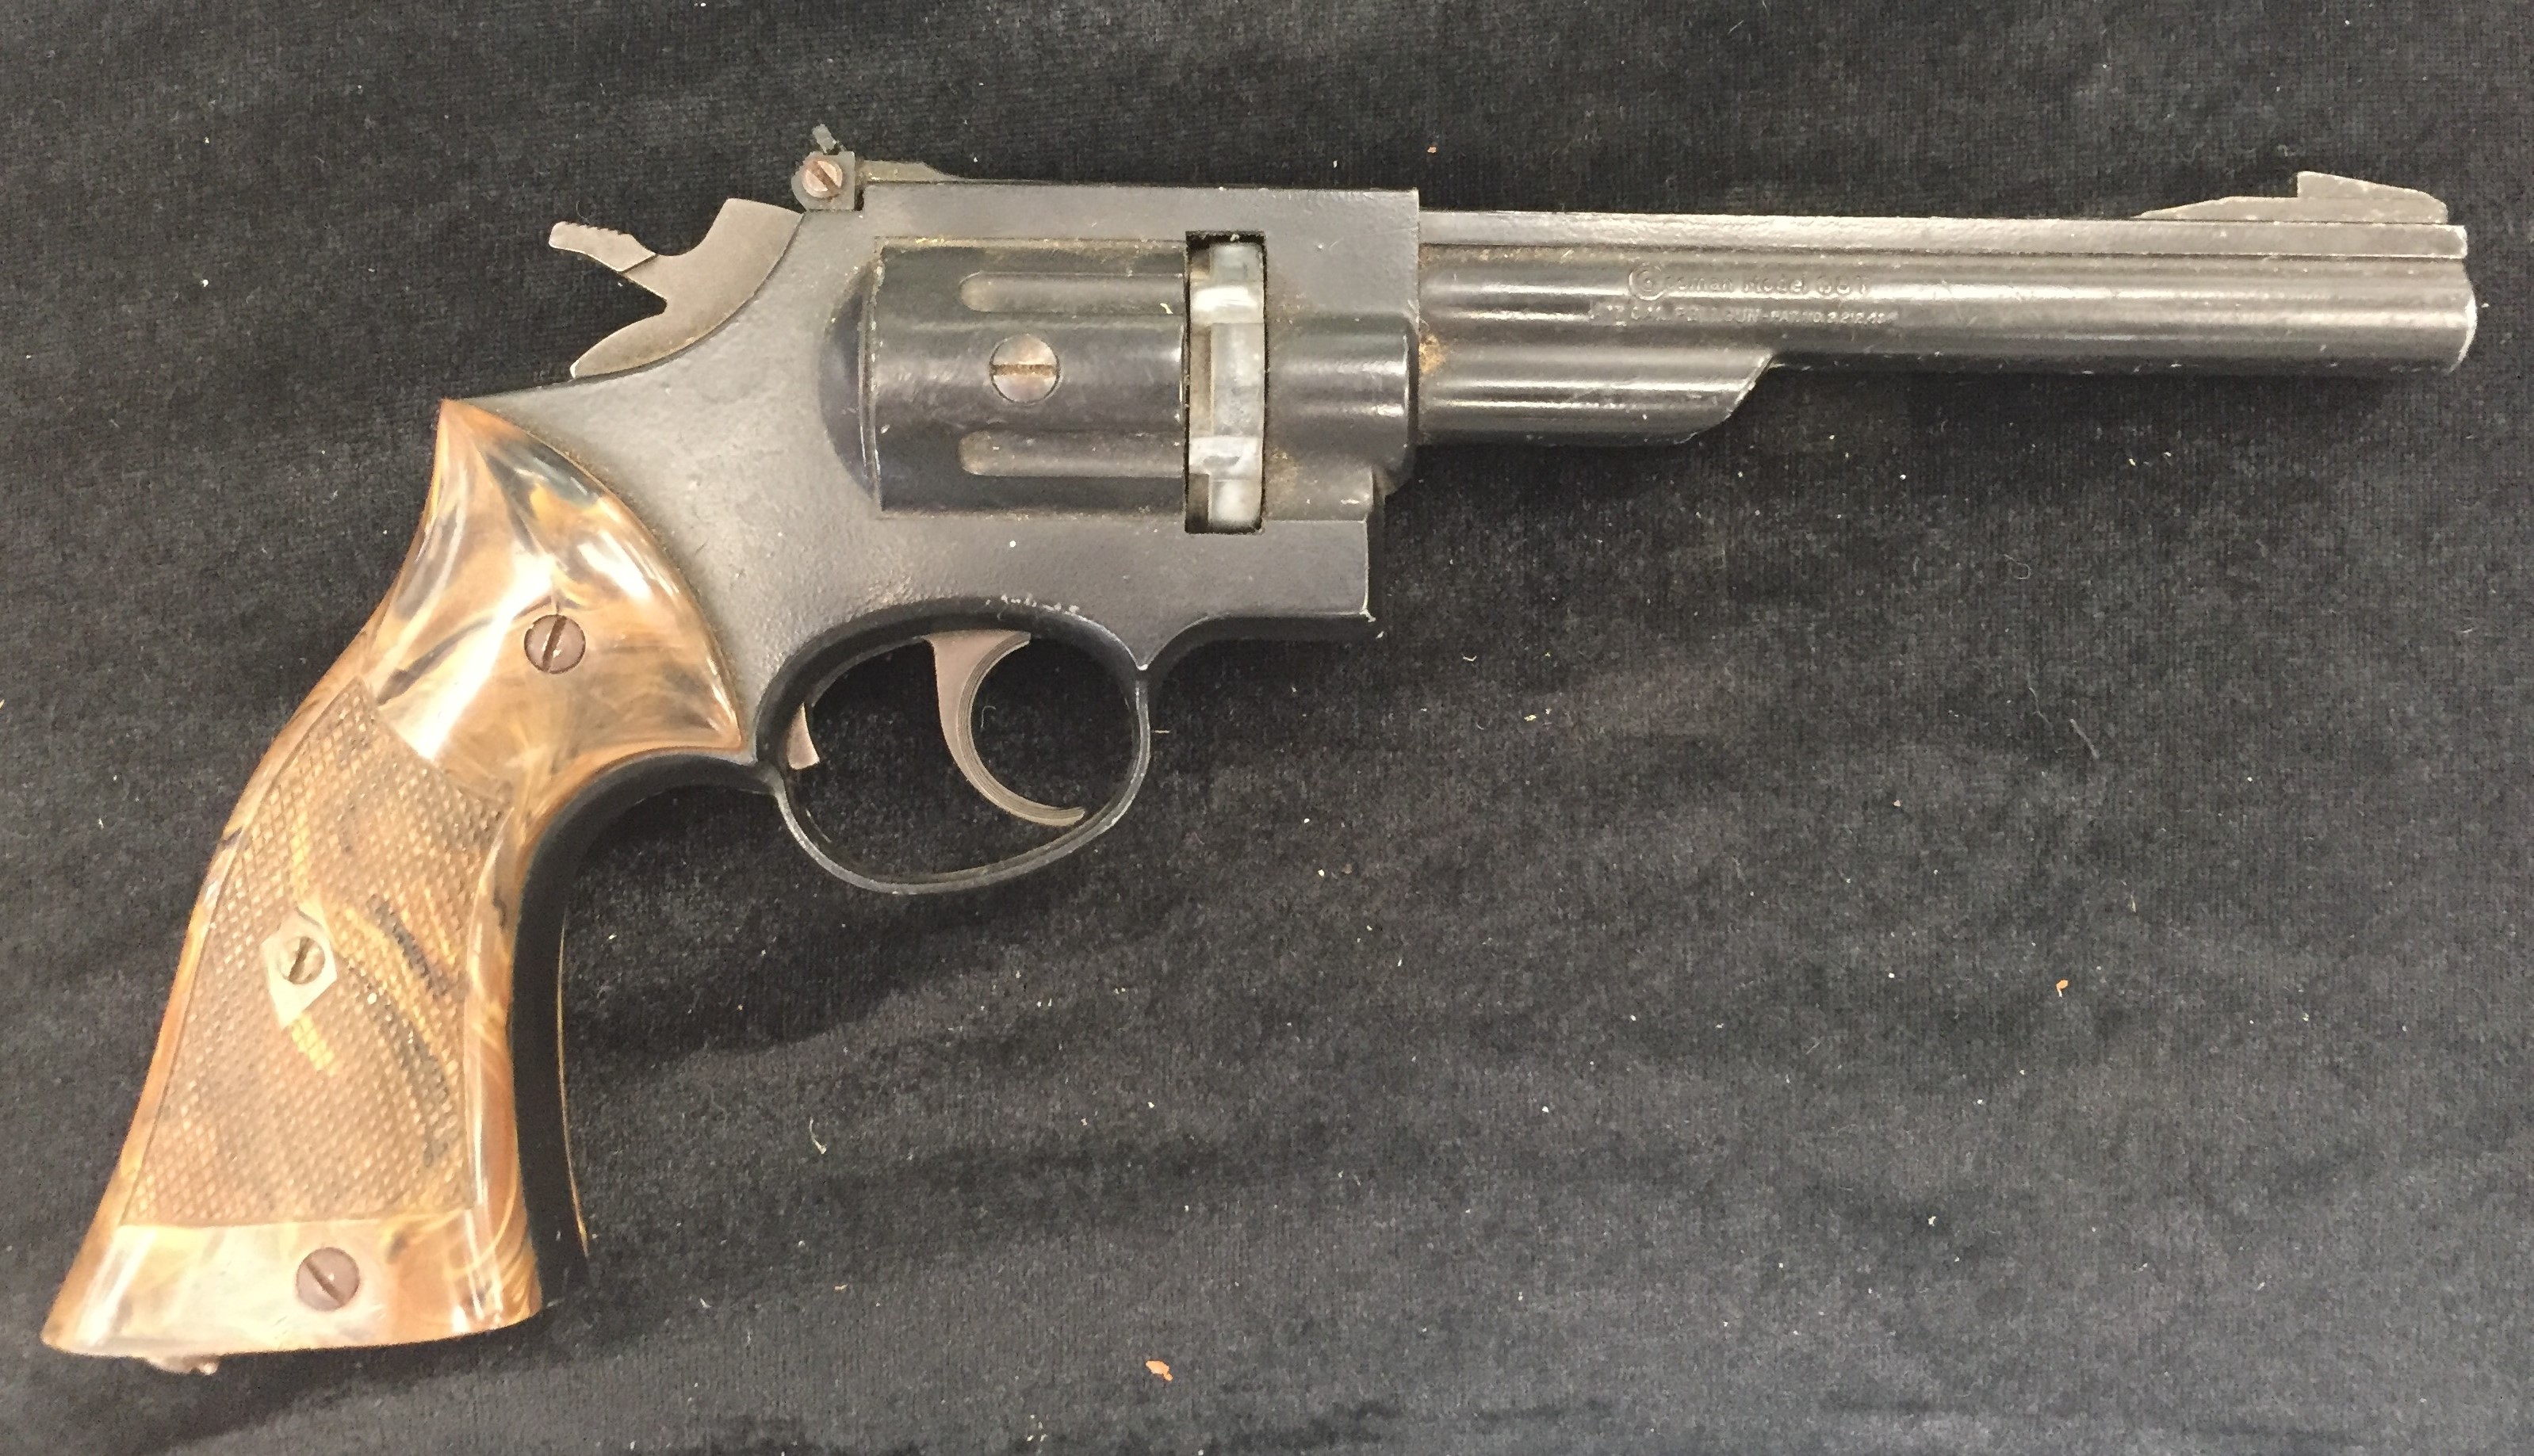 WITHDRAWN A vintage Crossman gas operated revolver air pistol